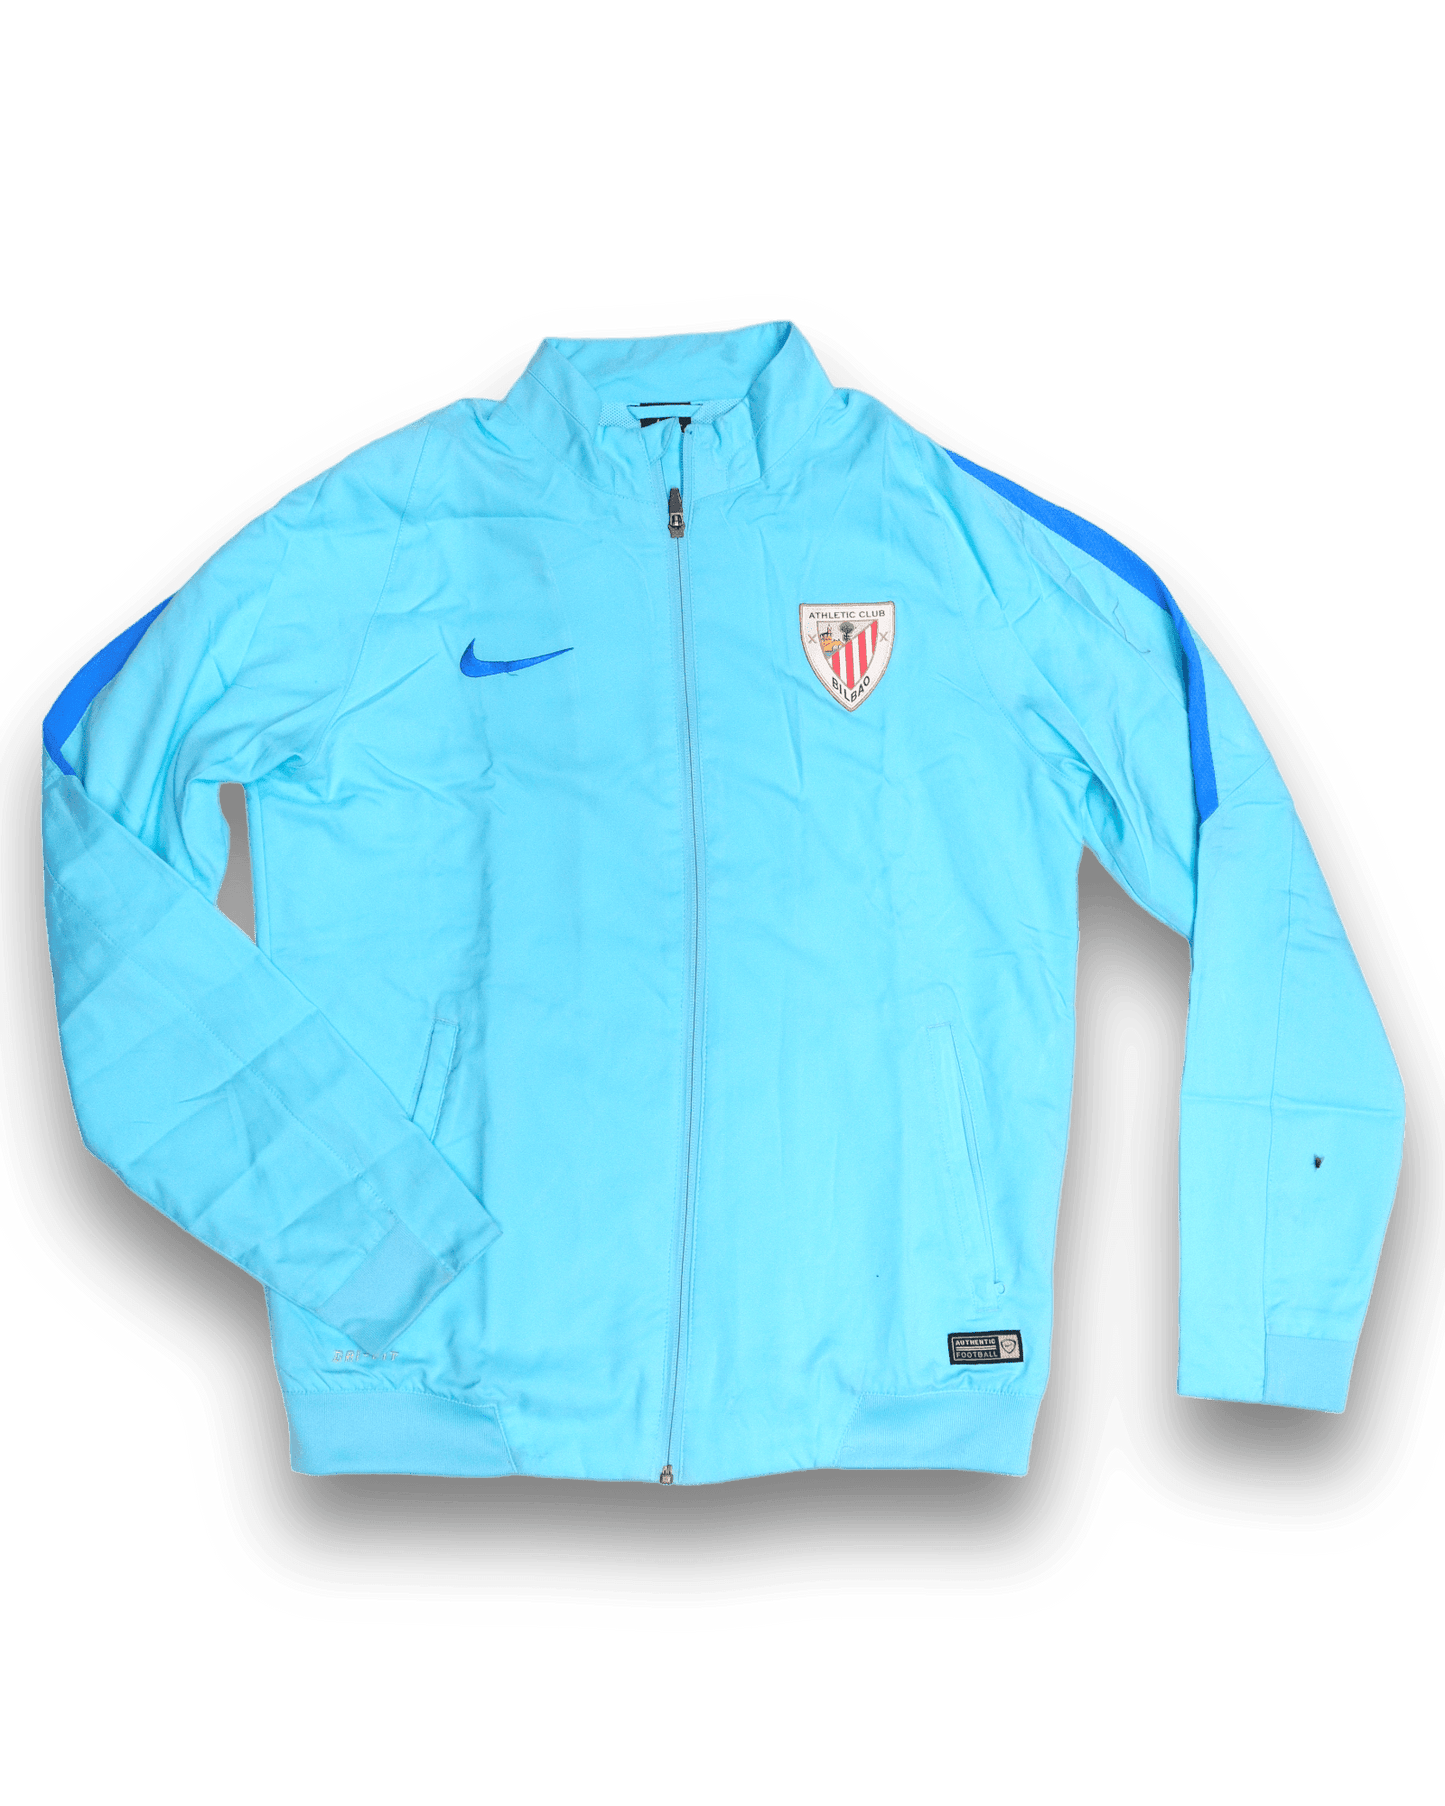 Nike athletic Bilbao Track Jacket - Apparel For Less